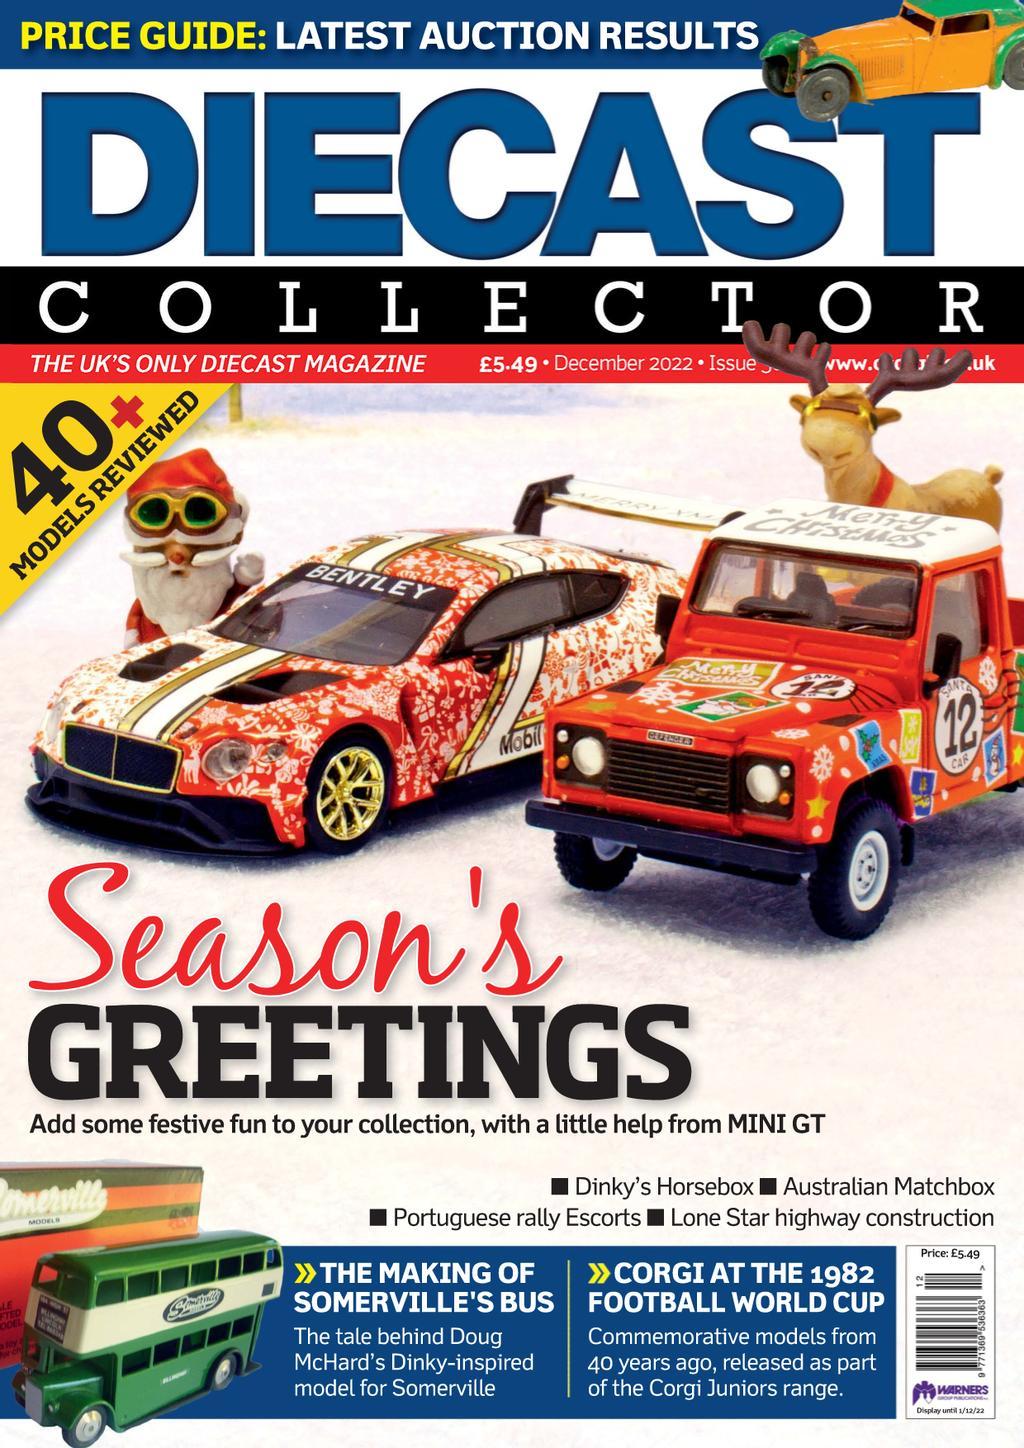 The Hornby Collector magazine Issue 36 Oct/Nov 2003 